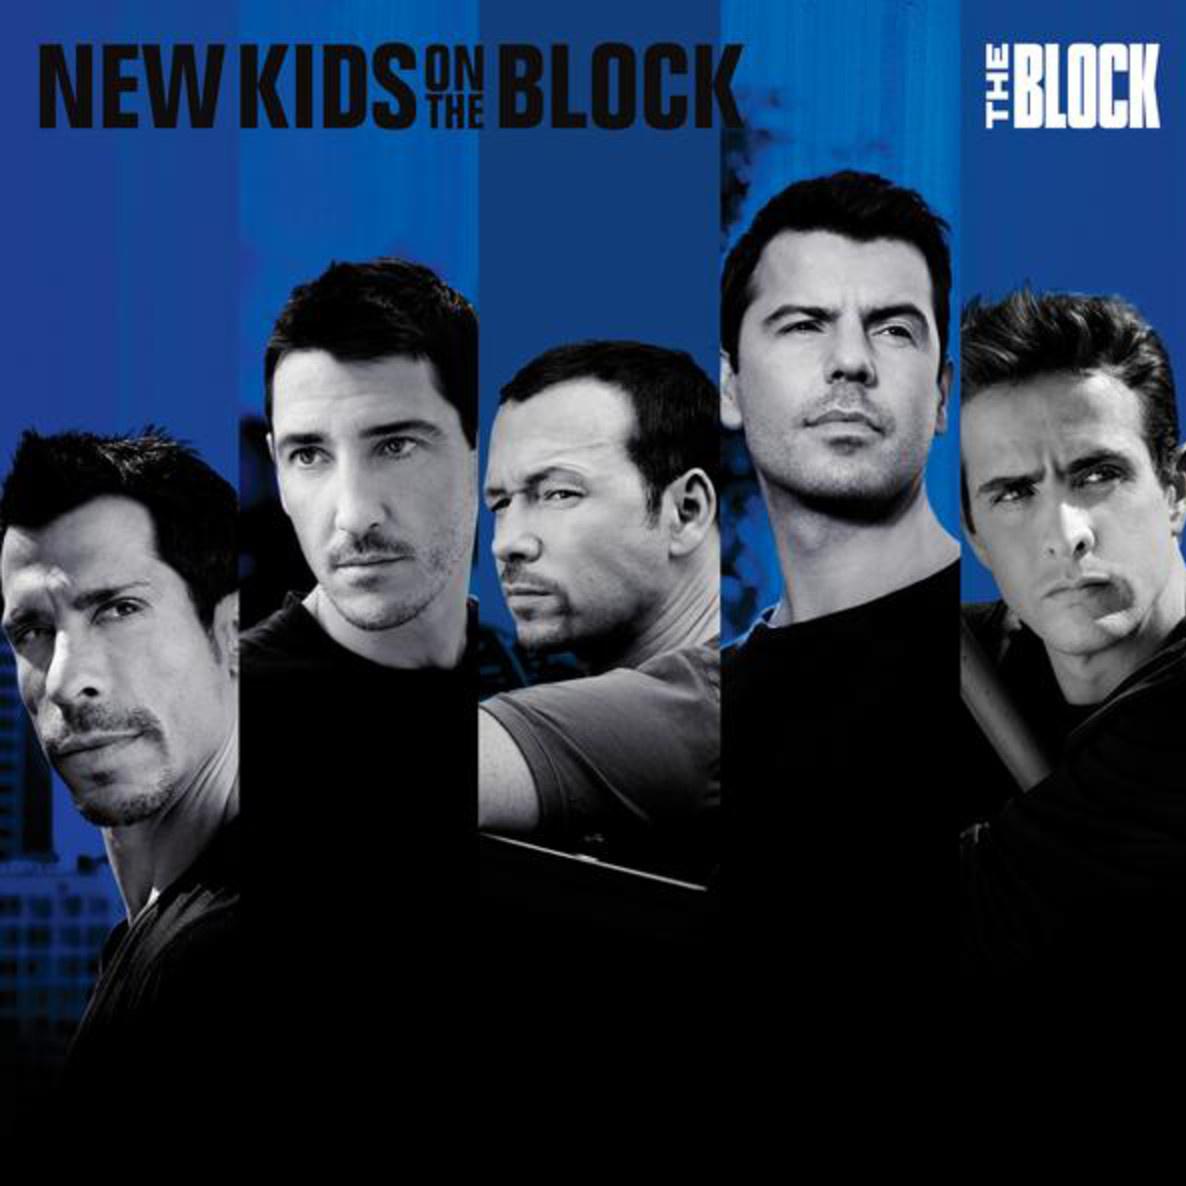 2 In The Morning歌词 歌手New Kids on the Block-专辑The Block-单曲《2 In The Morning》LRC歌词下载